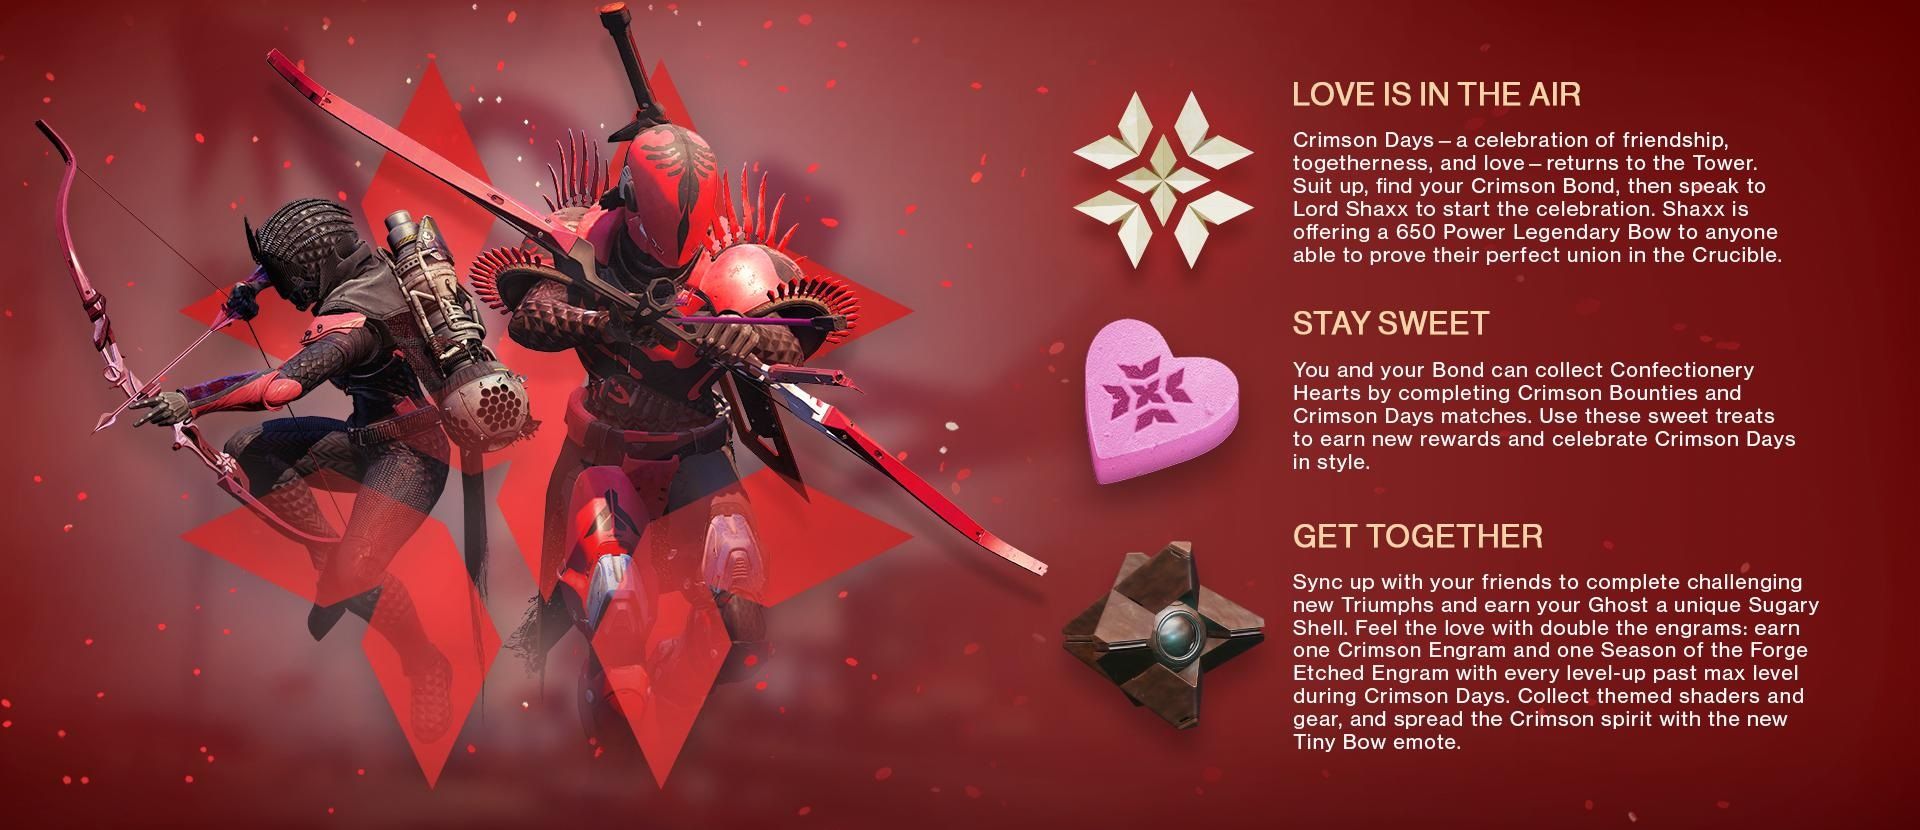 The Crimson Days Rewards and Hearts Explanation